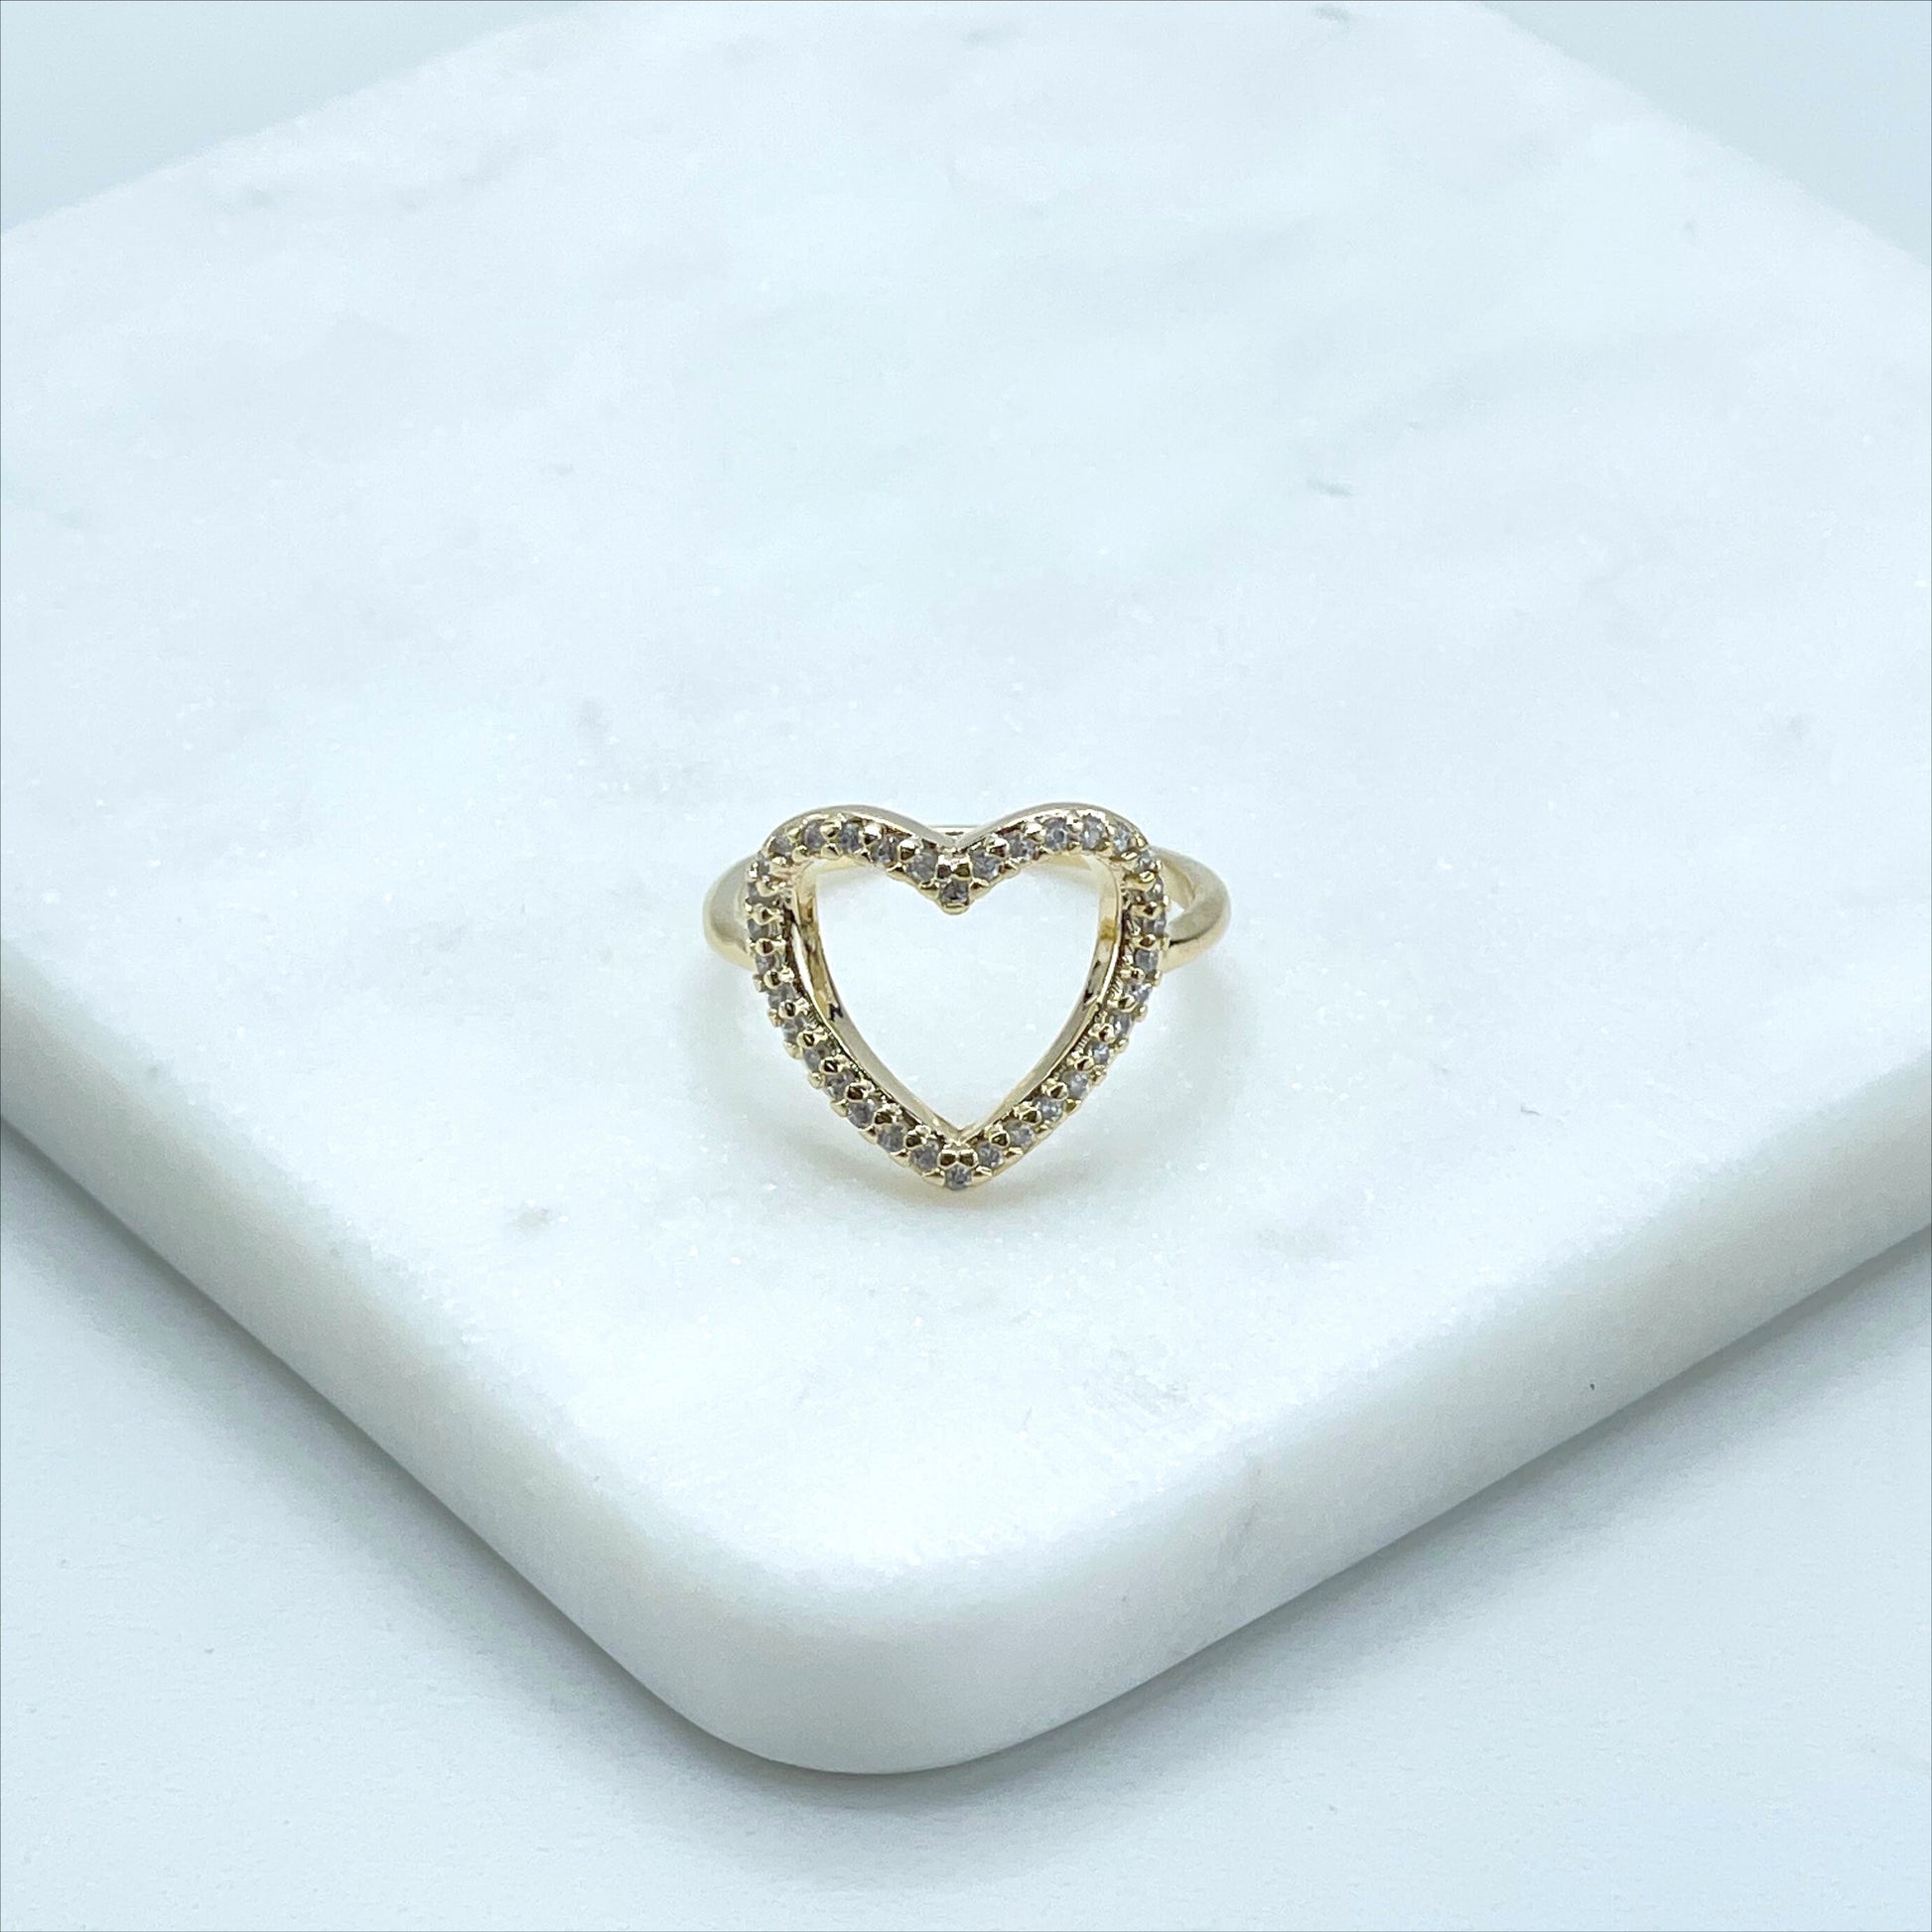 18k Gold Filled Micro Cubic Zirconia Cutout Heart Shape Design Delicate Romantic Ring,  Wholesale Jewelry Making Supplies